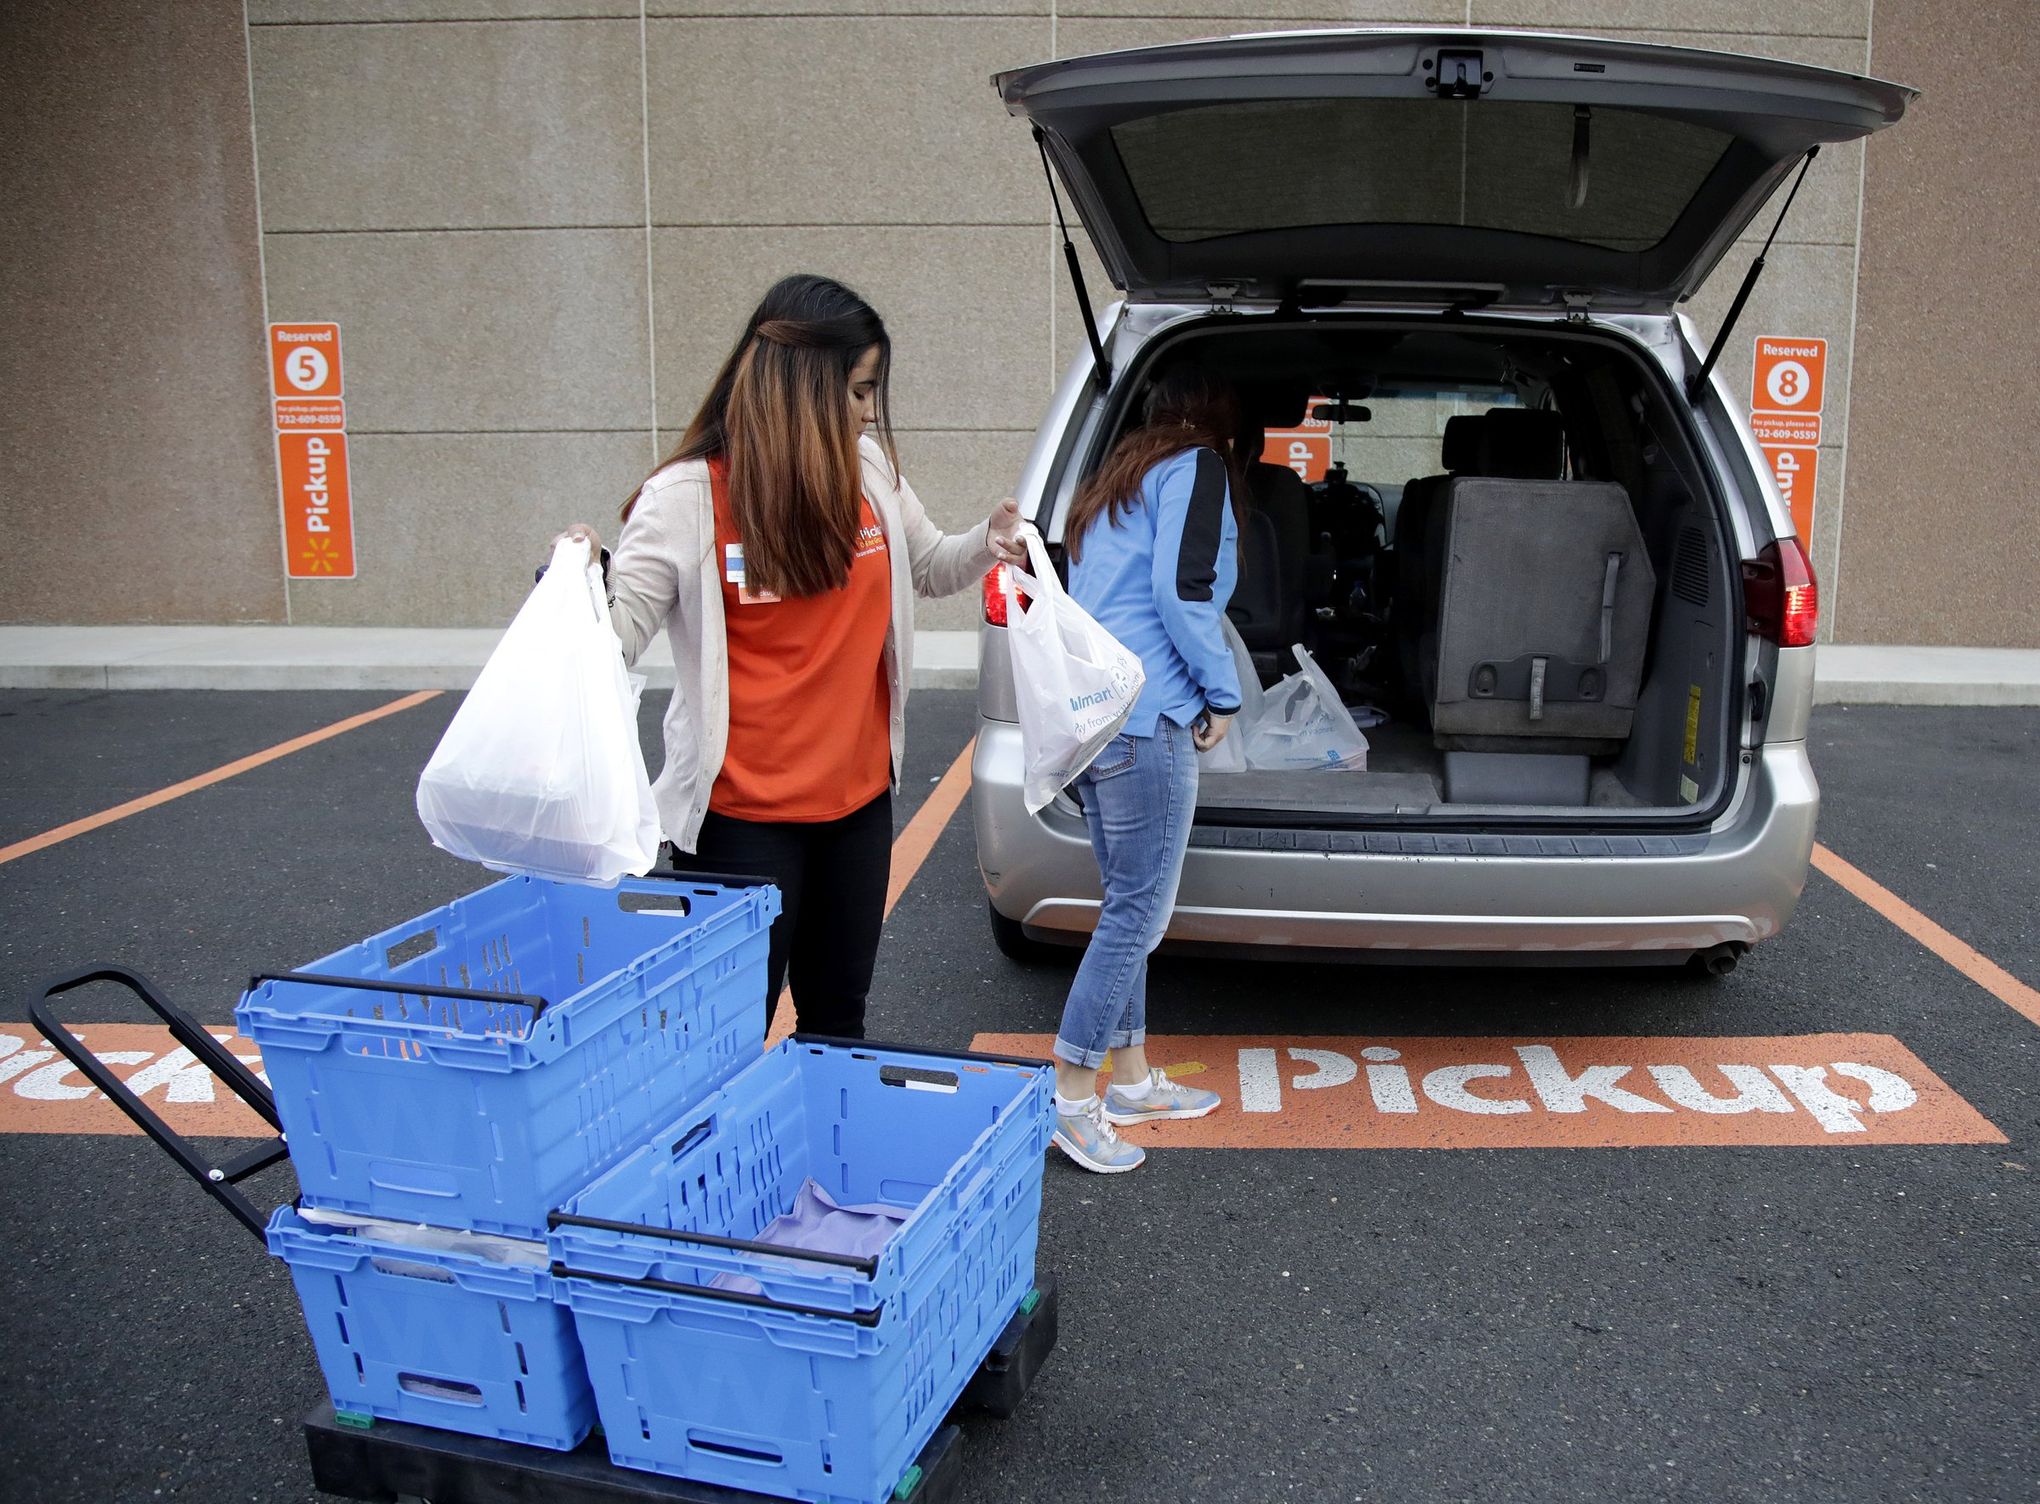 s Curbside Pickup at Whole Foods and Walmart's Compared